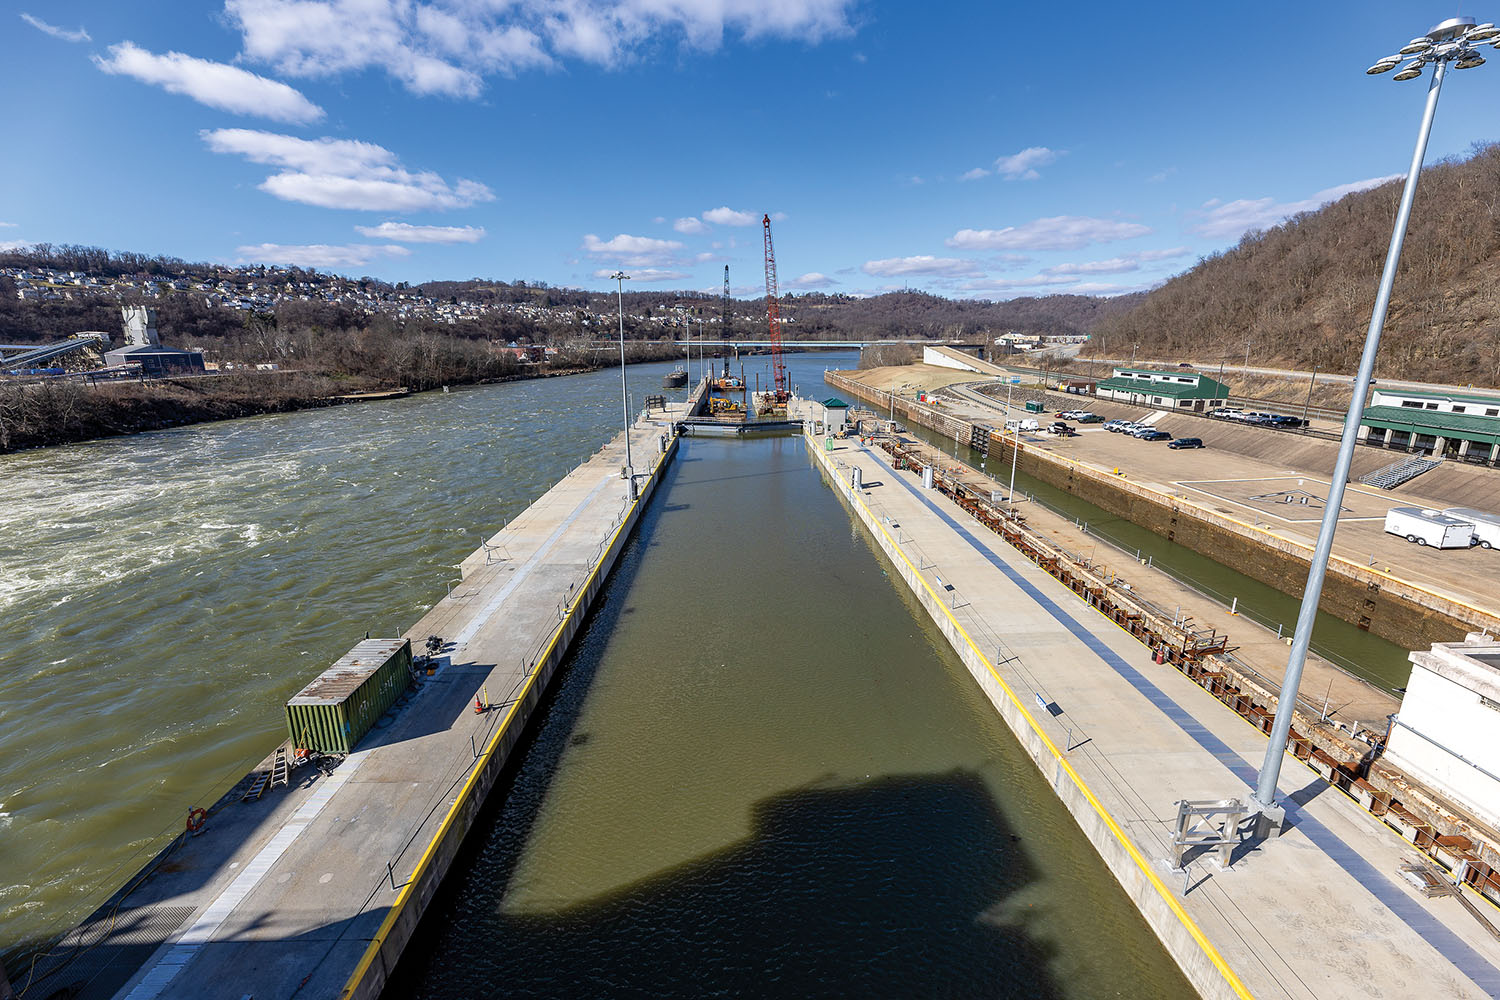 A downstream view of the newly constructed lock chamber at the Monongahela River Locks and Dam 4 in Charleroi, Pa., taken on February 14. The U.S. Army Corps of Engineers is currently conducting fully integrated system tests on the new navigation chamber, which measures 84 feet wide by 720 feet long. The Pittsburgh District continues to adjust the system’s programming to prepare the lock to open for navigation later this year. The facility is part of the Lower Monongahela River Project, which includes locks and dams at Charleroi, Elizabeth and Braddock, Pa. The three locks experience the highest volume of commercial traffic on the entire Monongahela River navigation system. (U.S. Army Corps of Engineers Pittsburgh District photo by Michel Sauret)